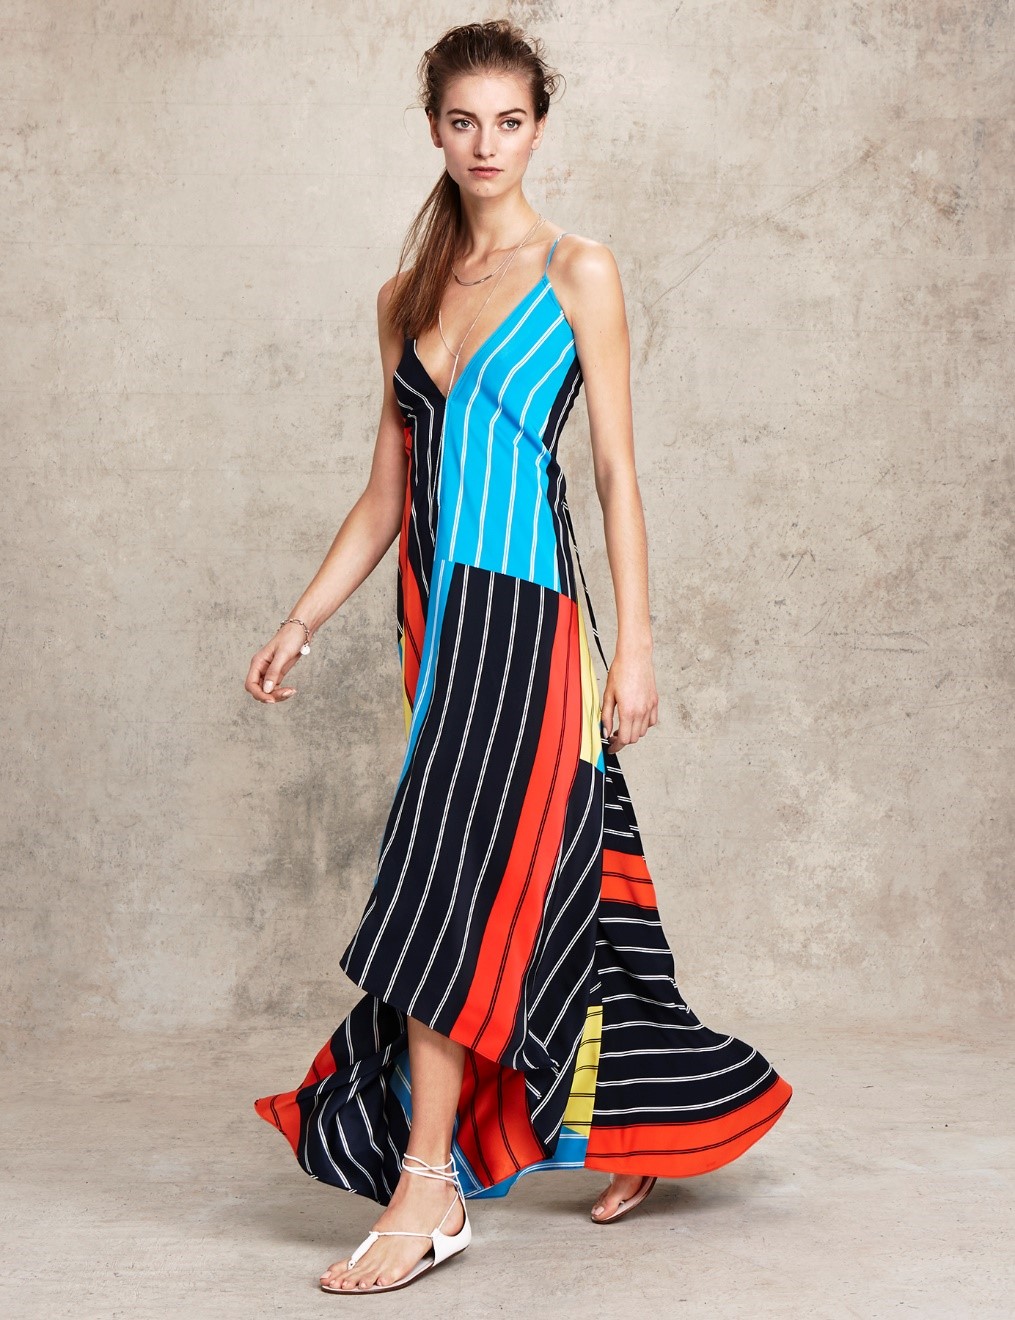 Reasons To Wear Boho-Chic Maxi Dresses For Summer 